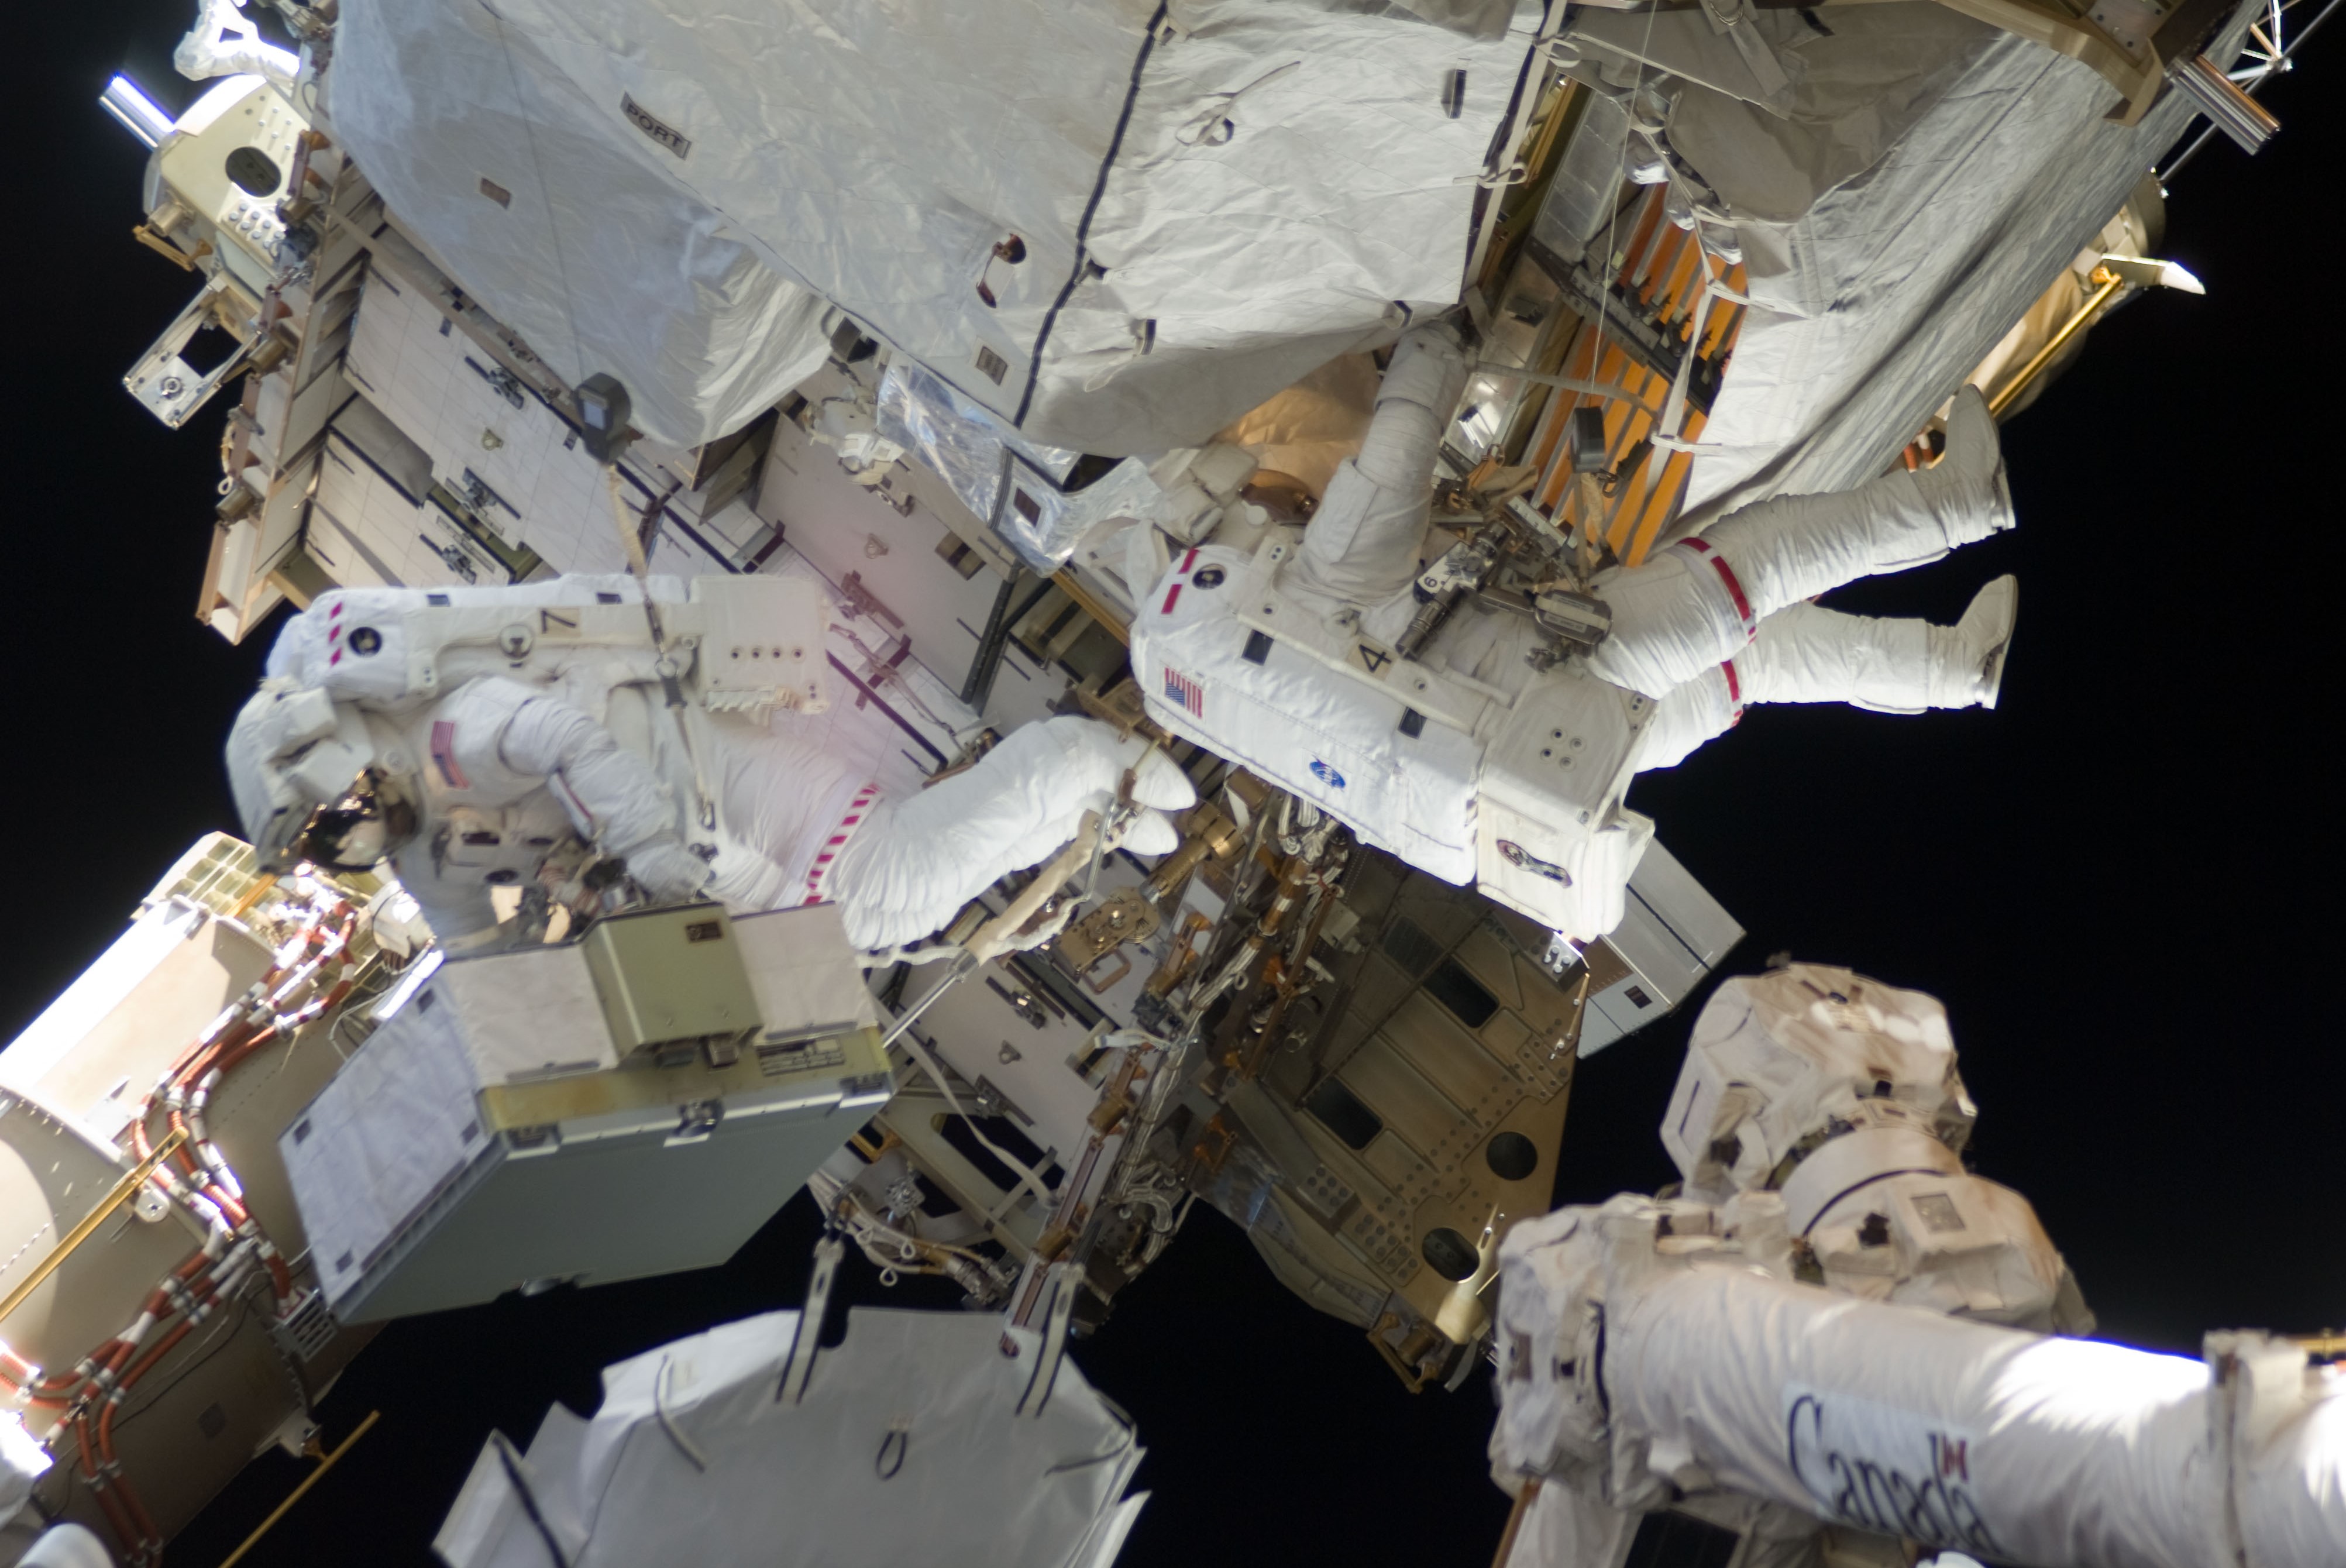 Christopher J. Cassidy, left, and Thomas H. Marshburn exchange space station batteries during the mission's fourth spacewalk